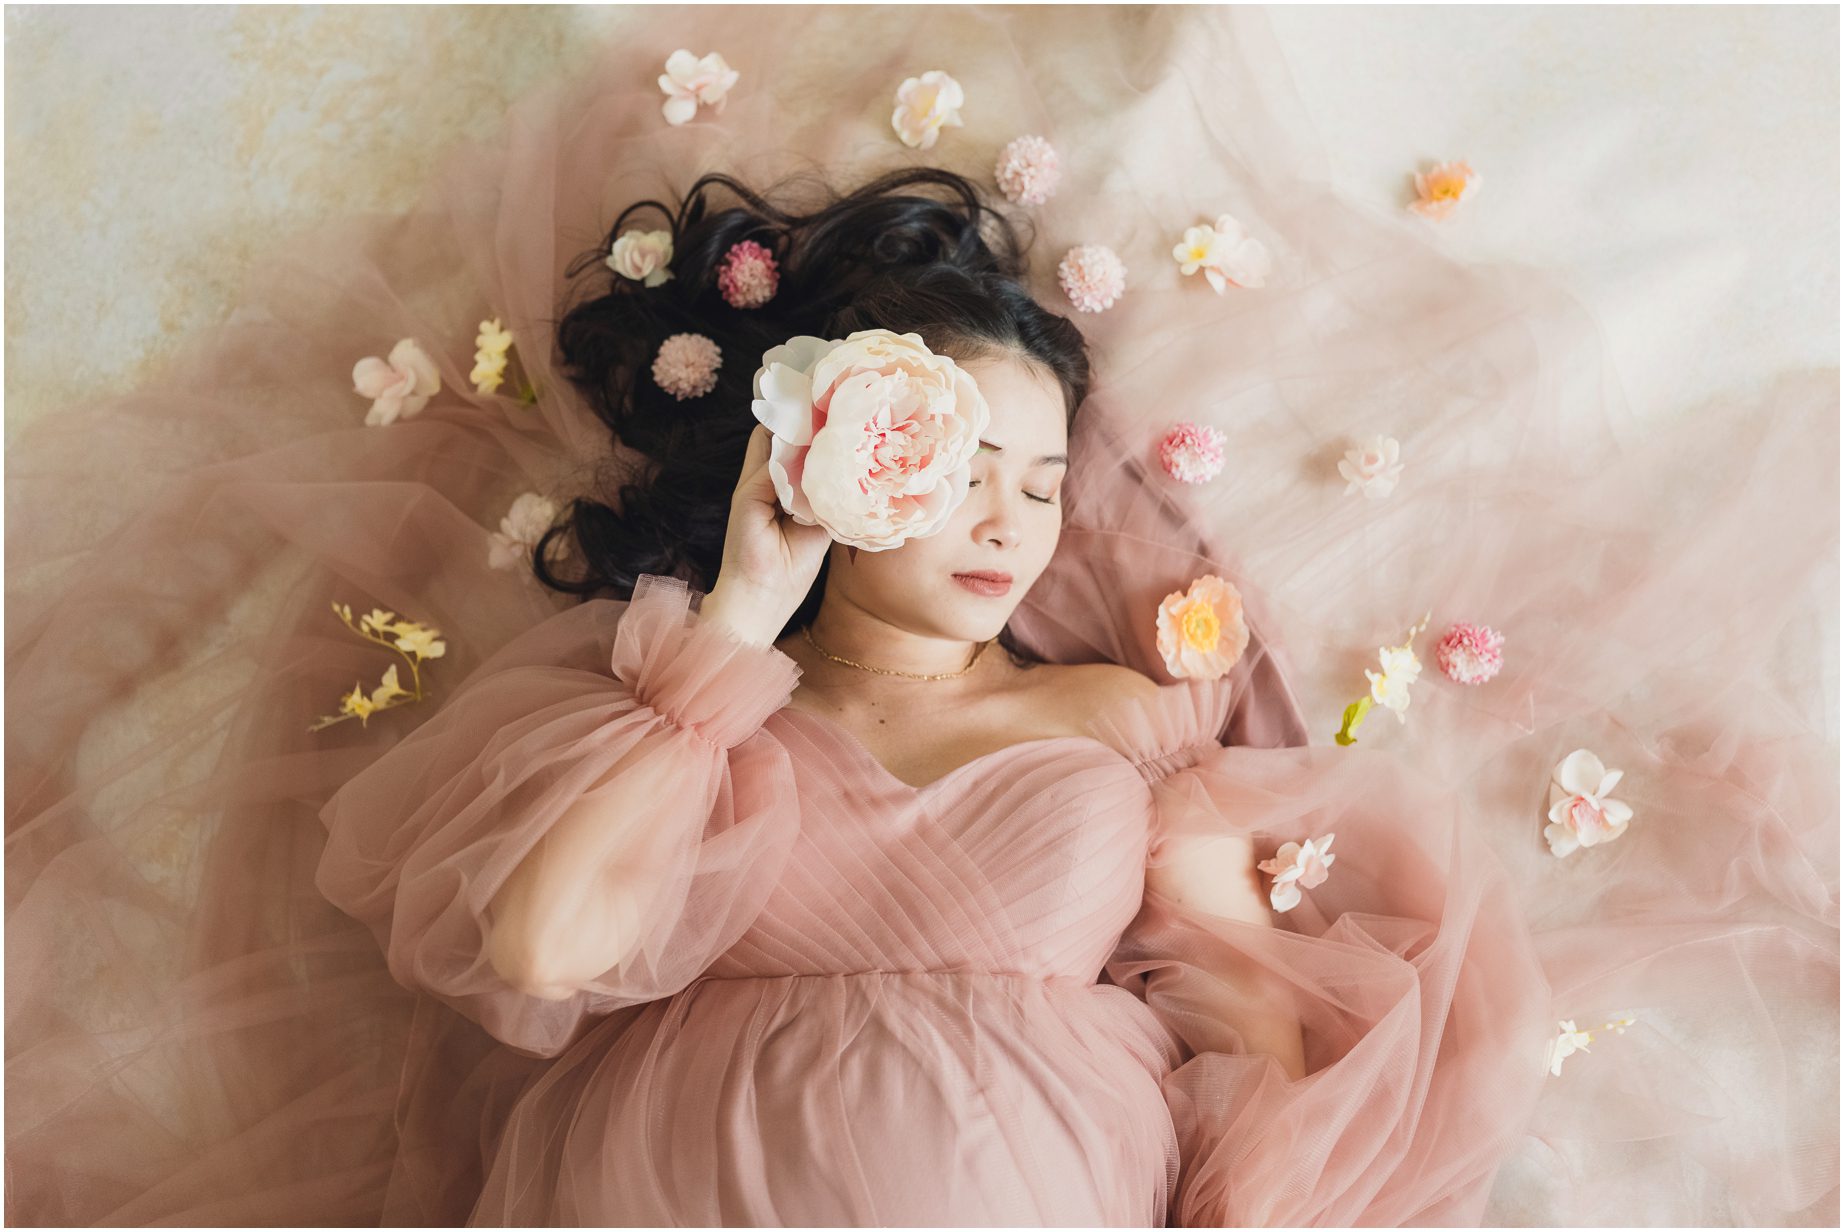 At her Maternity shoot, an expecting mother poses with pink, white, and peach flowers, while wearing a flowy dress and laying on a bed of fabric. Sun and Sparrow is a Portland Maternity and Newborn Photographer